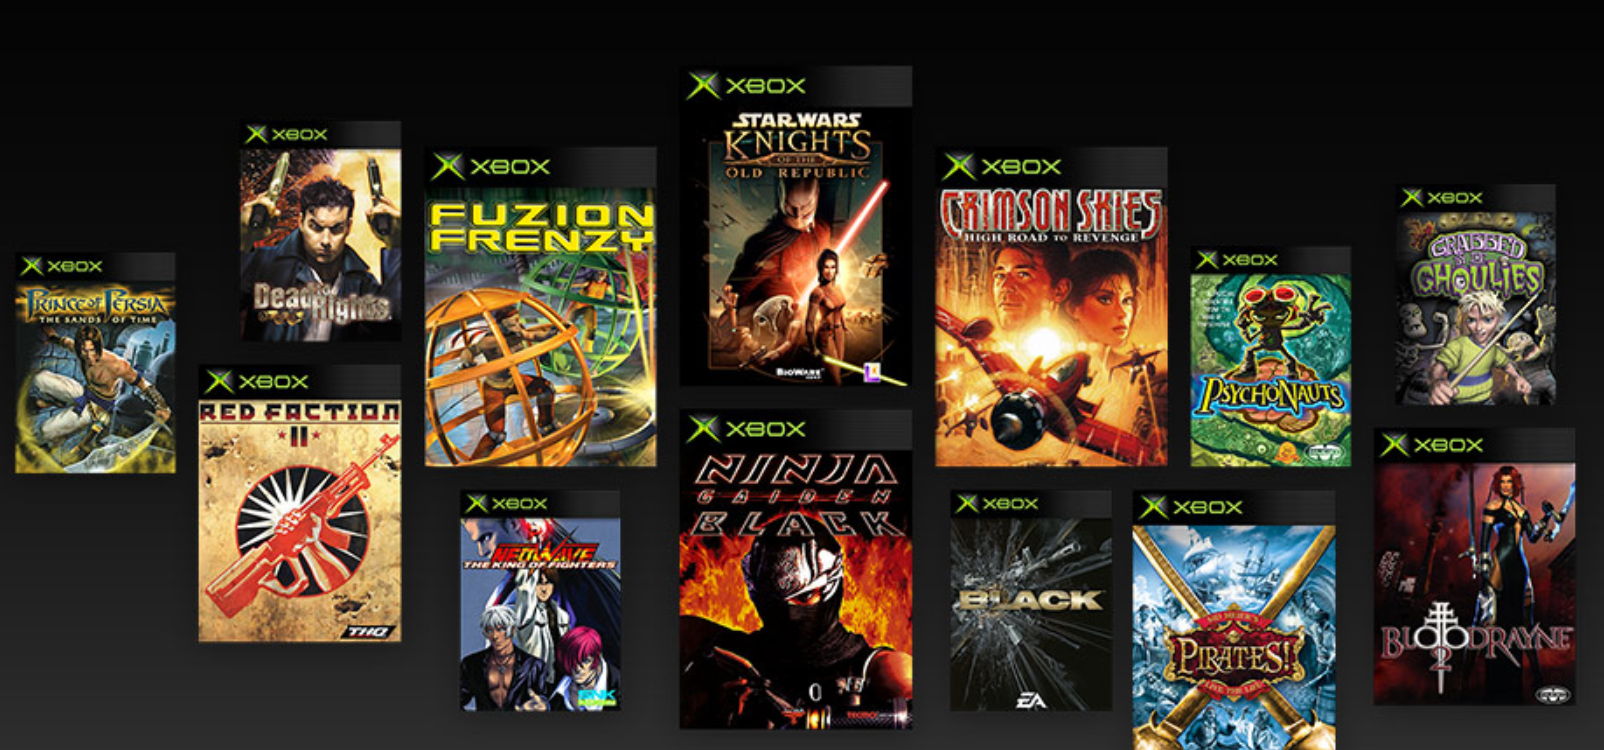 list of xbox games